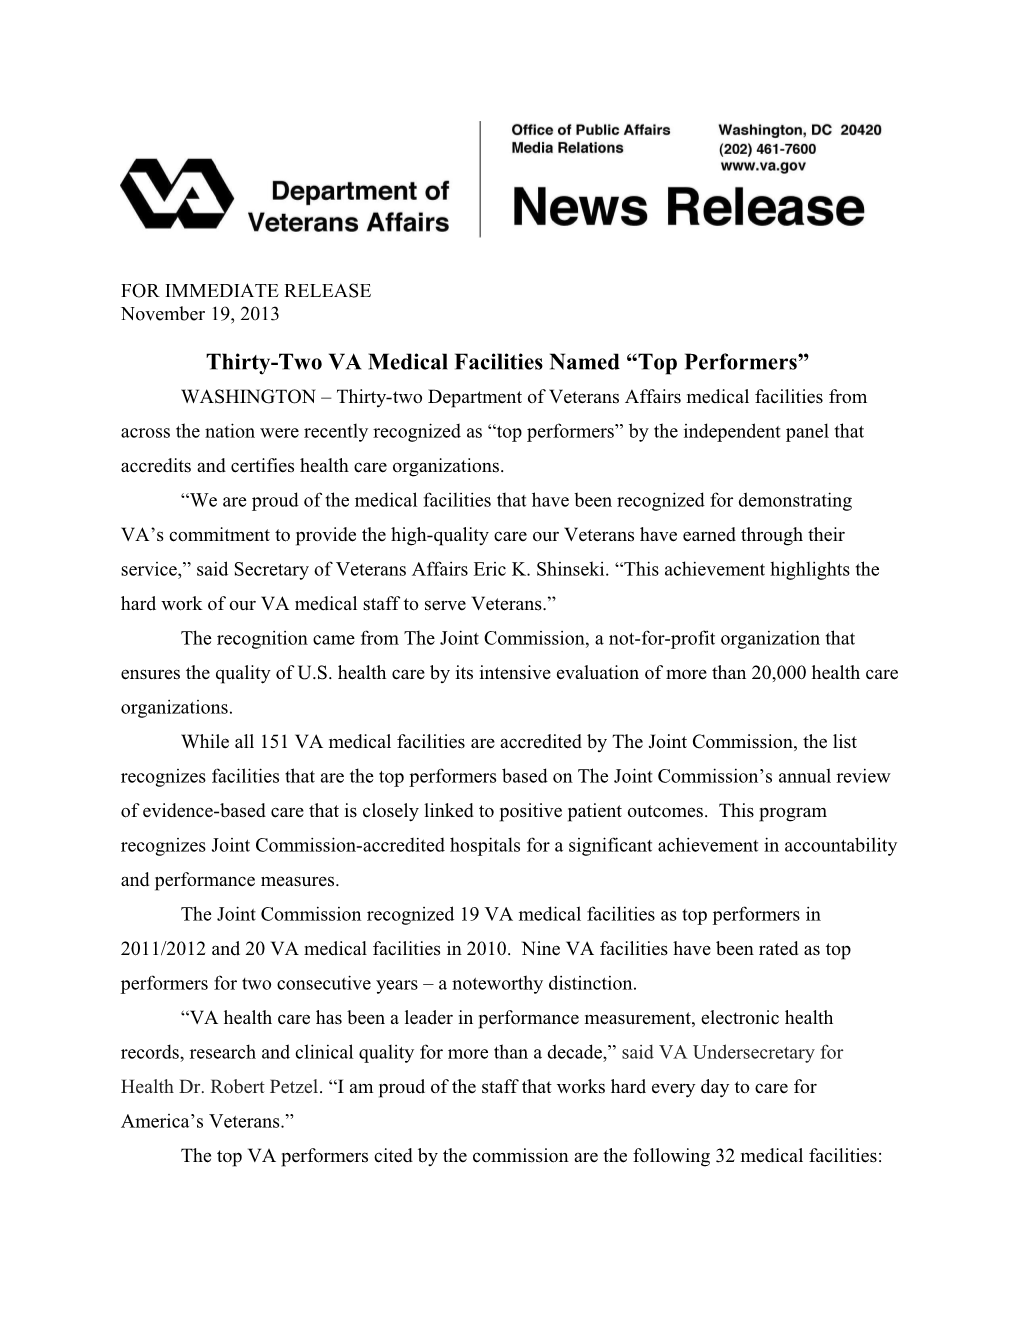 FOR IMMEDIATE RELEASE November 19, 2013 Thirty-Two VA Medical Facilities Named Top Performers